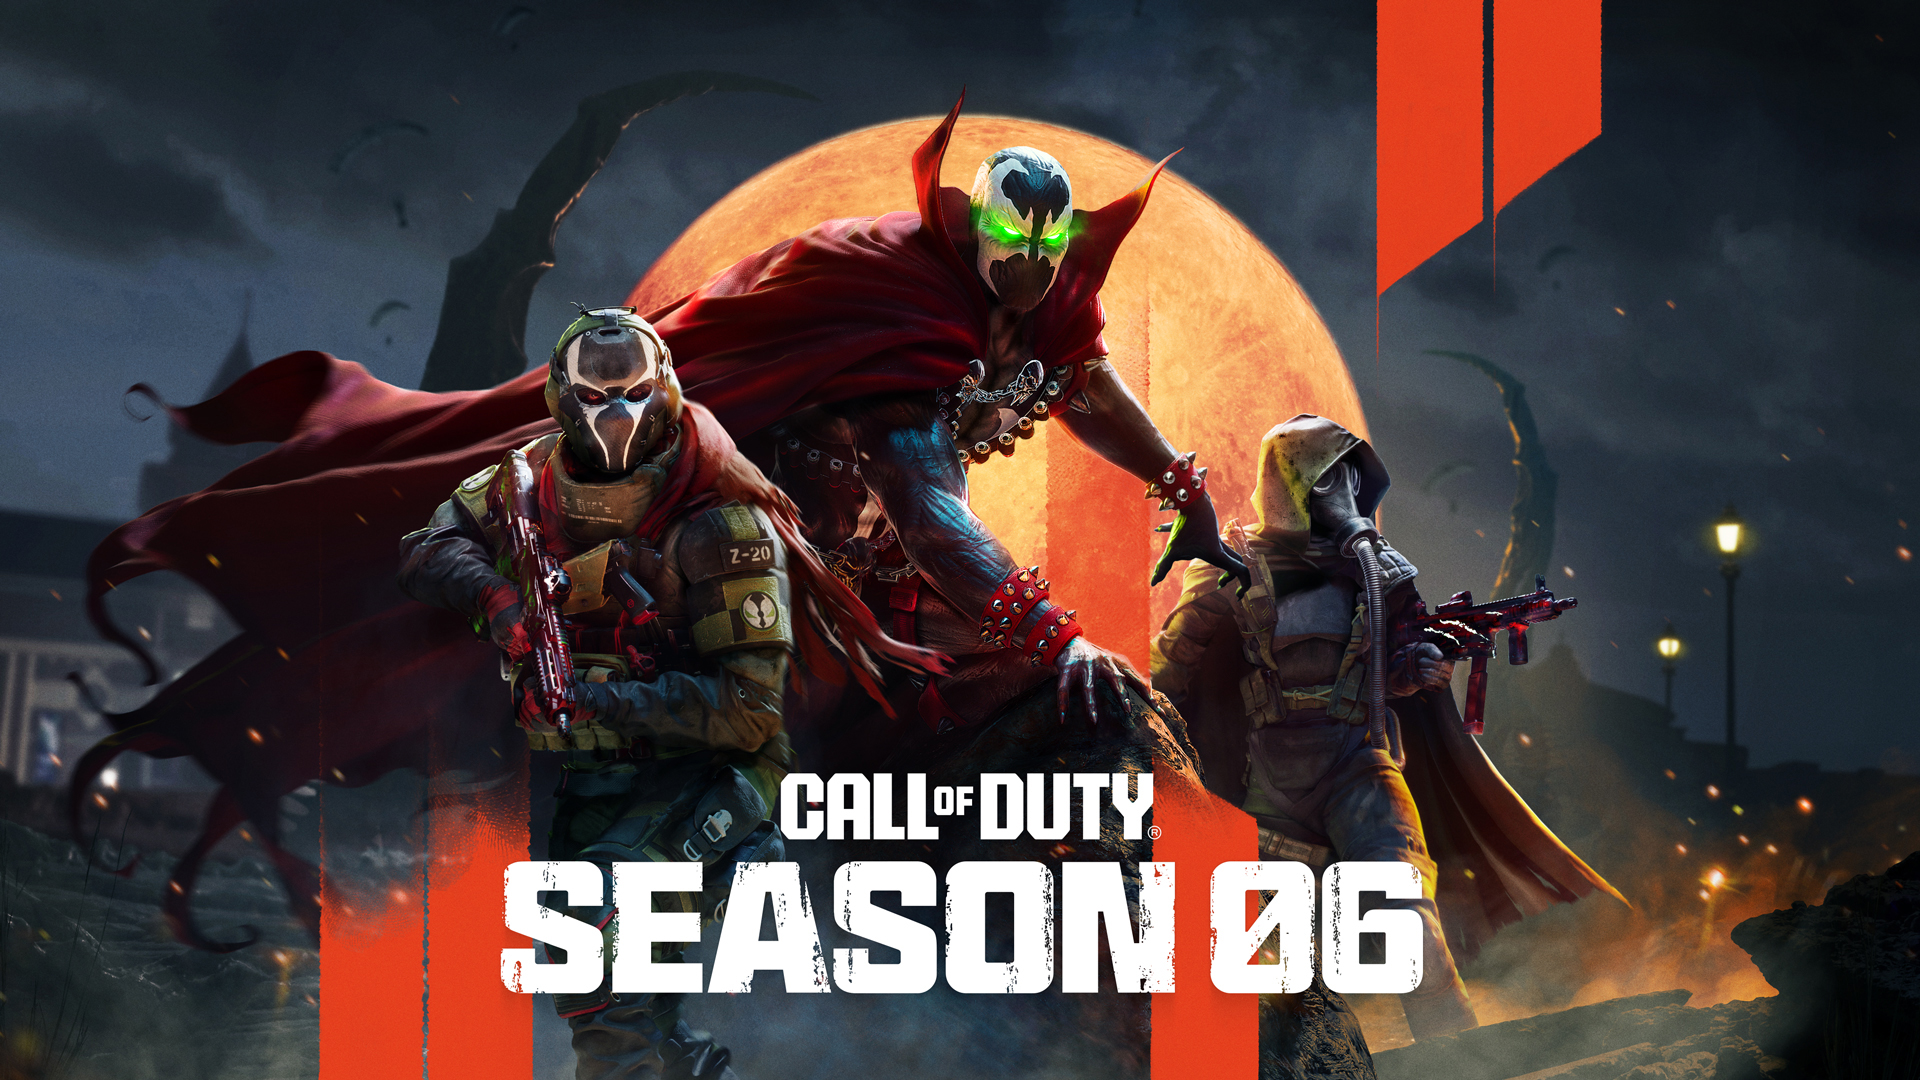 Call of Duty season 06 adds Spawn, Lilith, and more